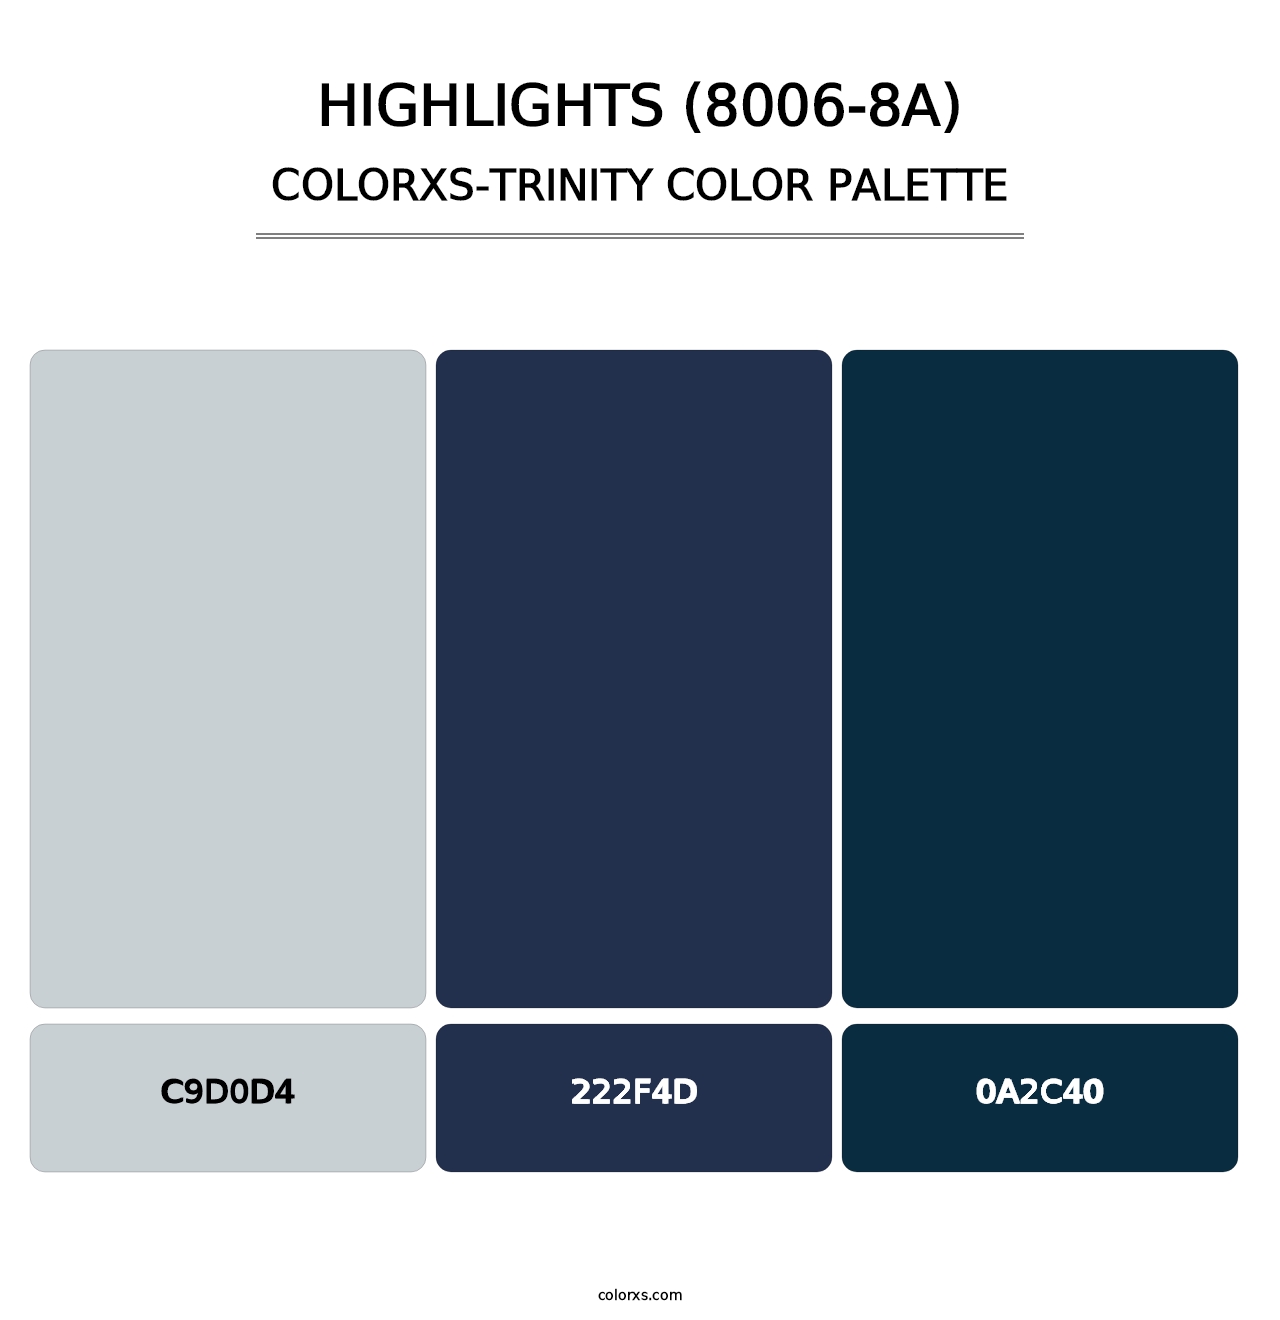 Highlights (8006-8A) - Colorxs Trinity Palette